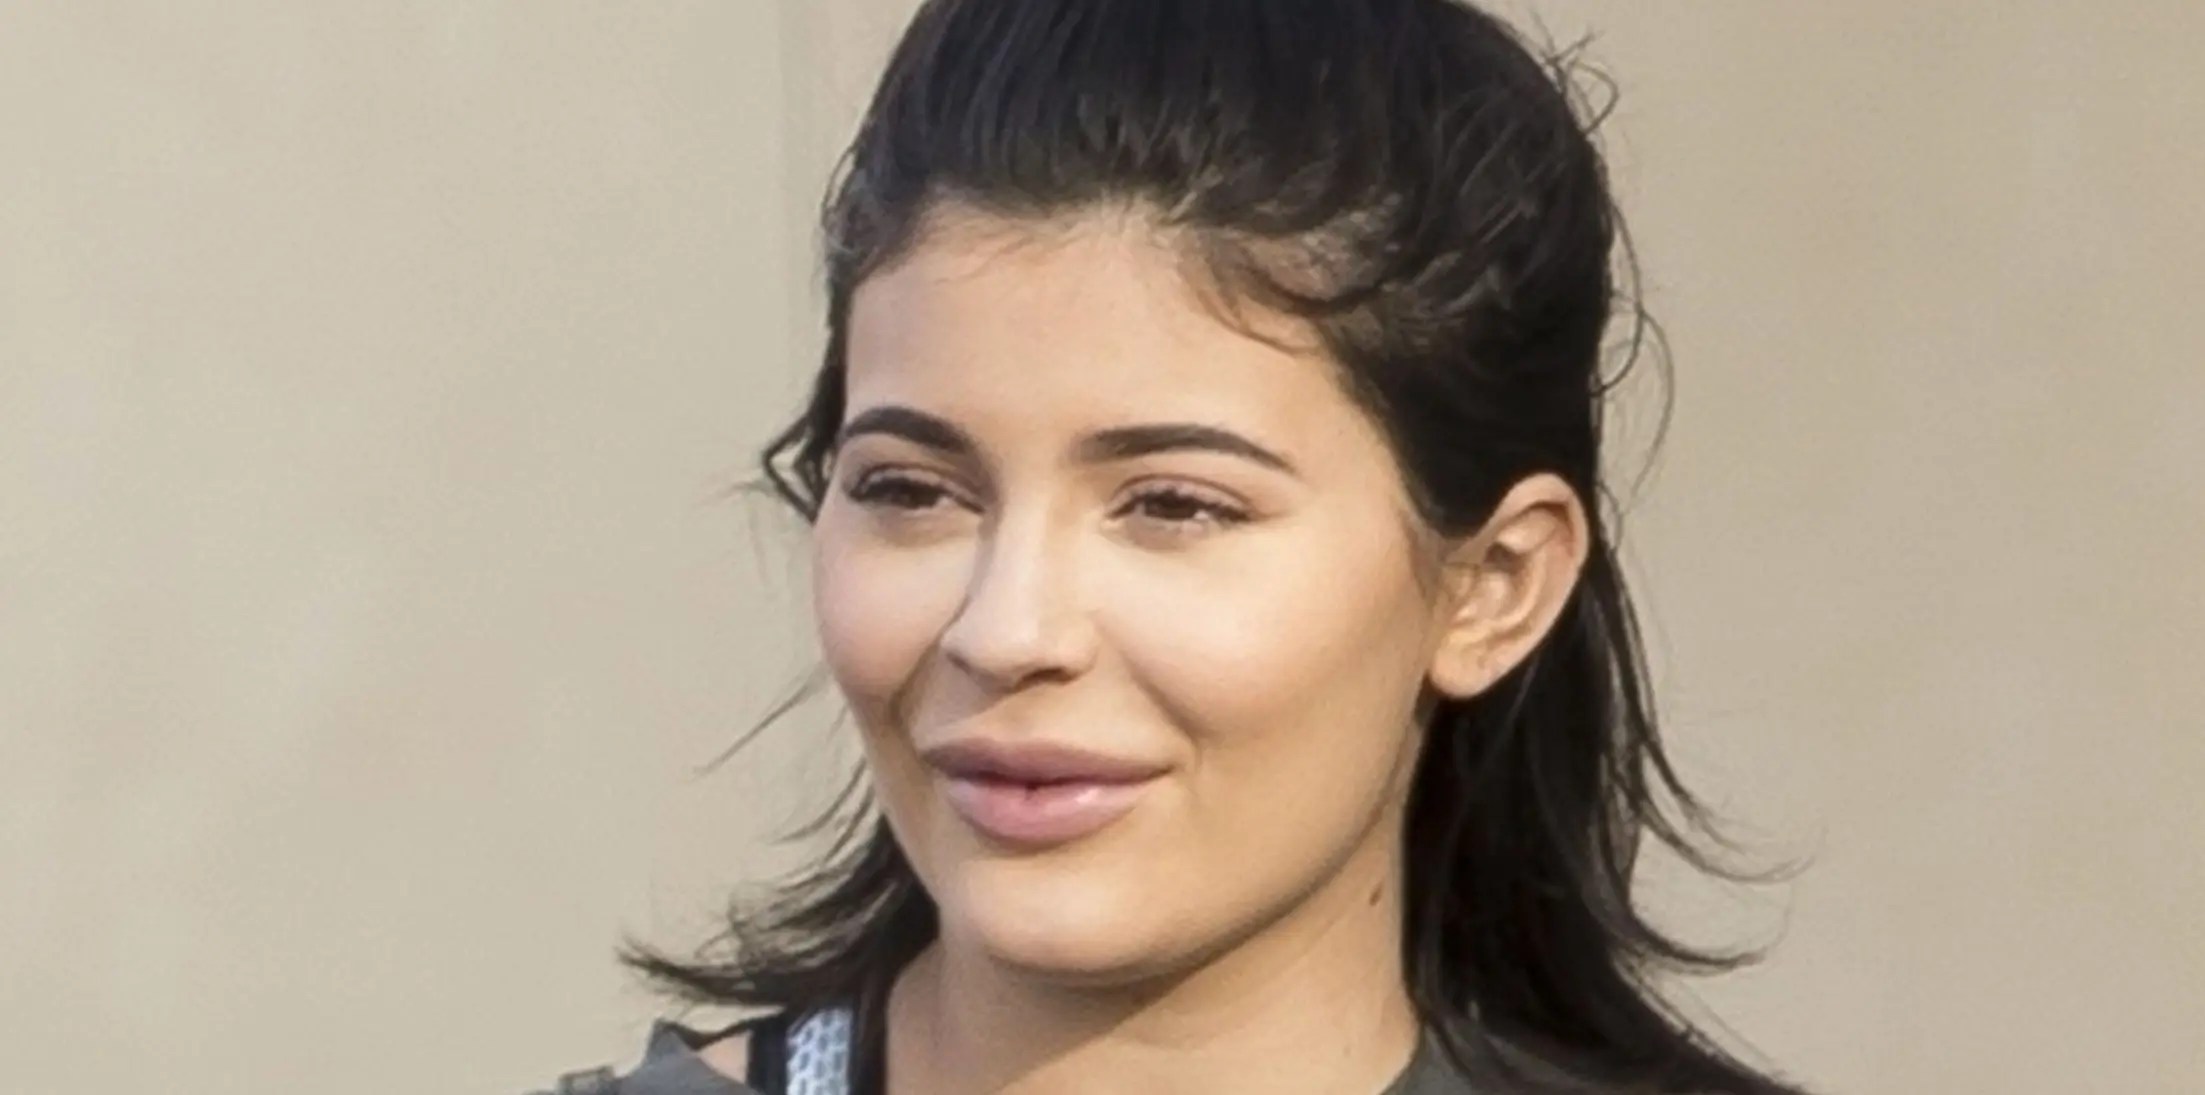 Kylie Jenner's Lip Injections May Have Gone Overboard